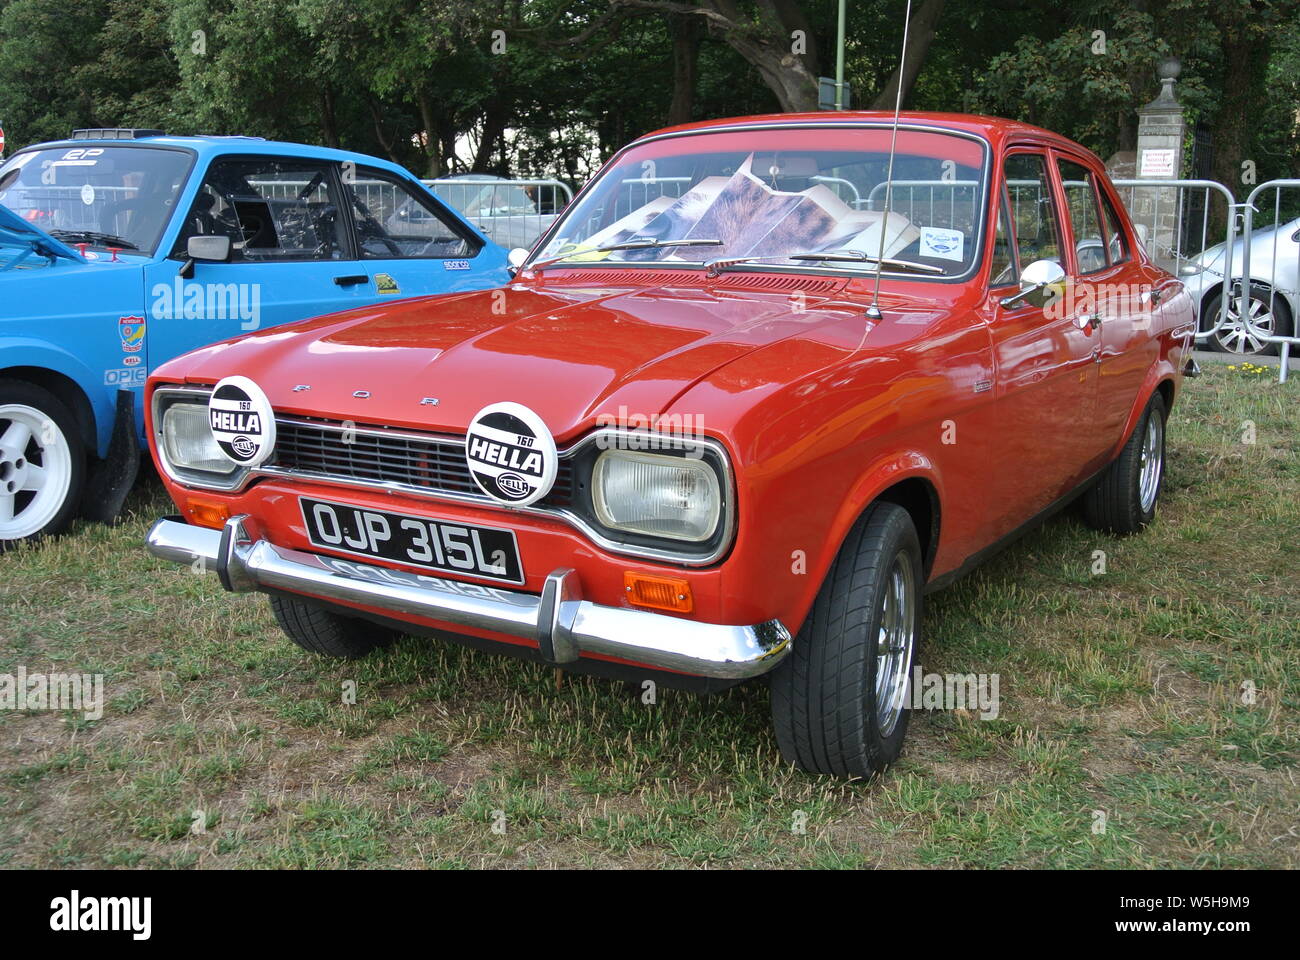 Mk1 Ford Escort parked on display at the Riviera classic car show, Paignton, Devon, England, UK. Stock Photo